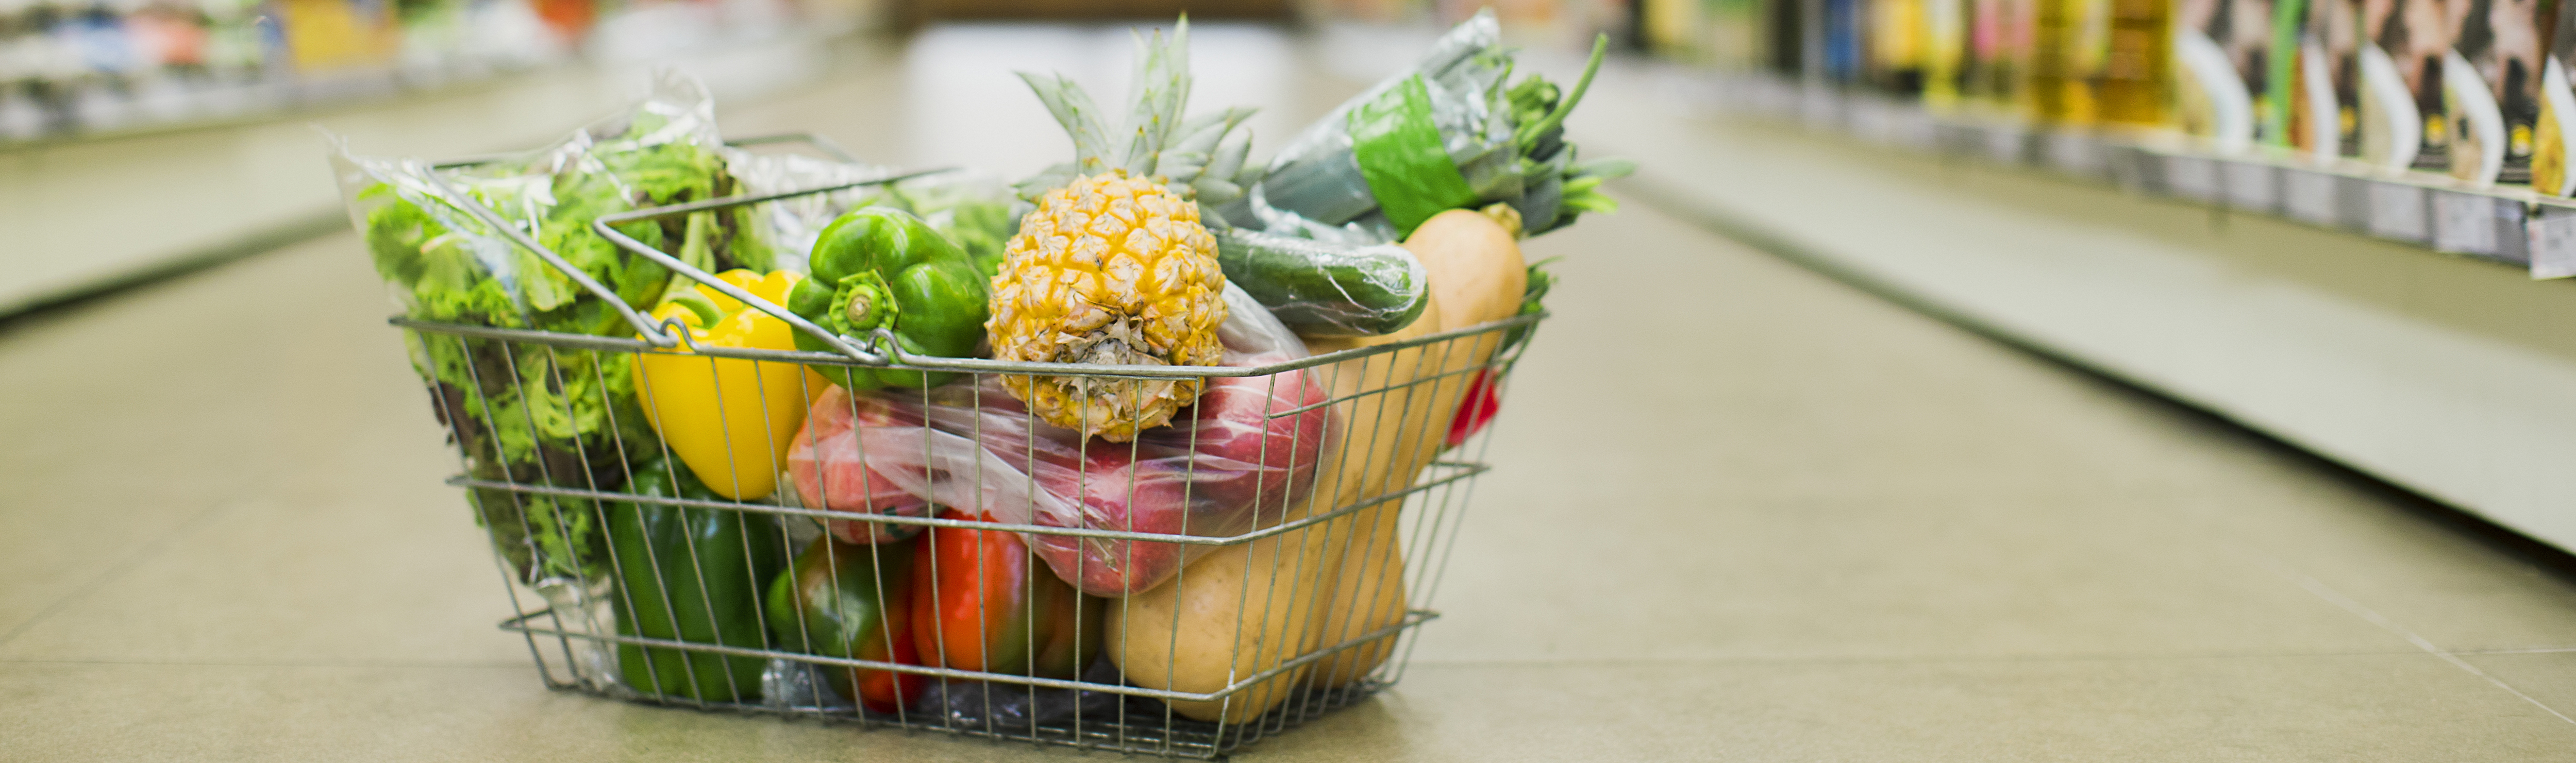 Image of a grocery basket sitting in the aisle that is filled with fruits and vegetables